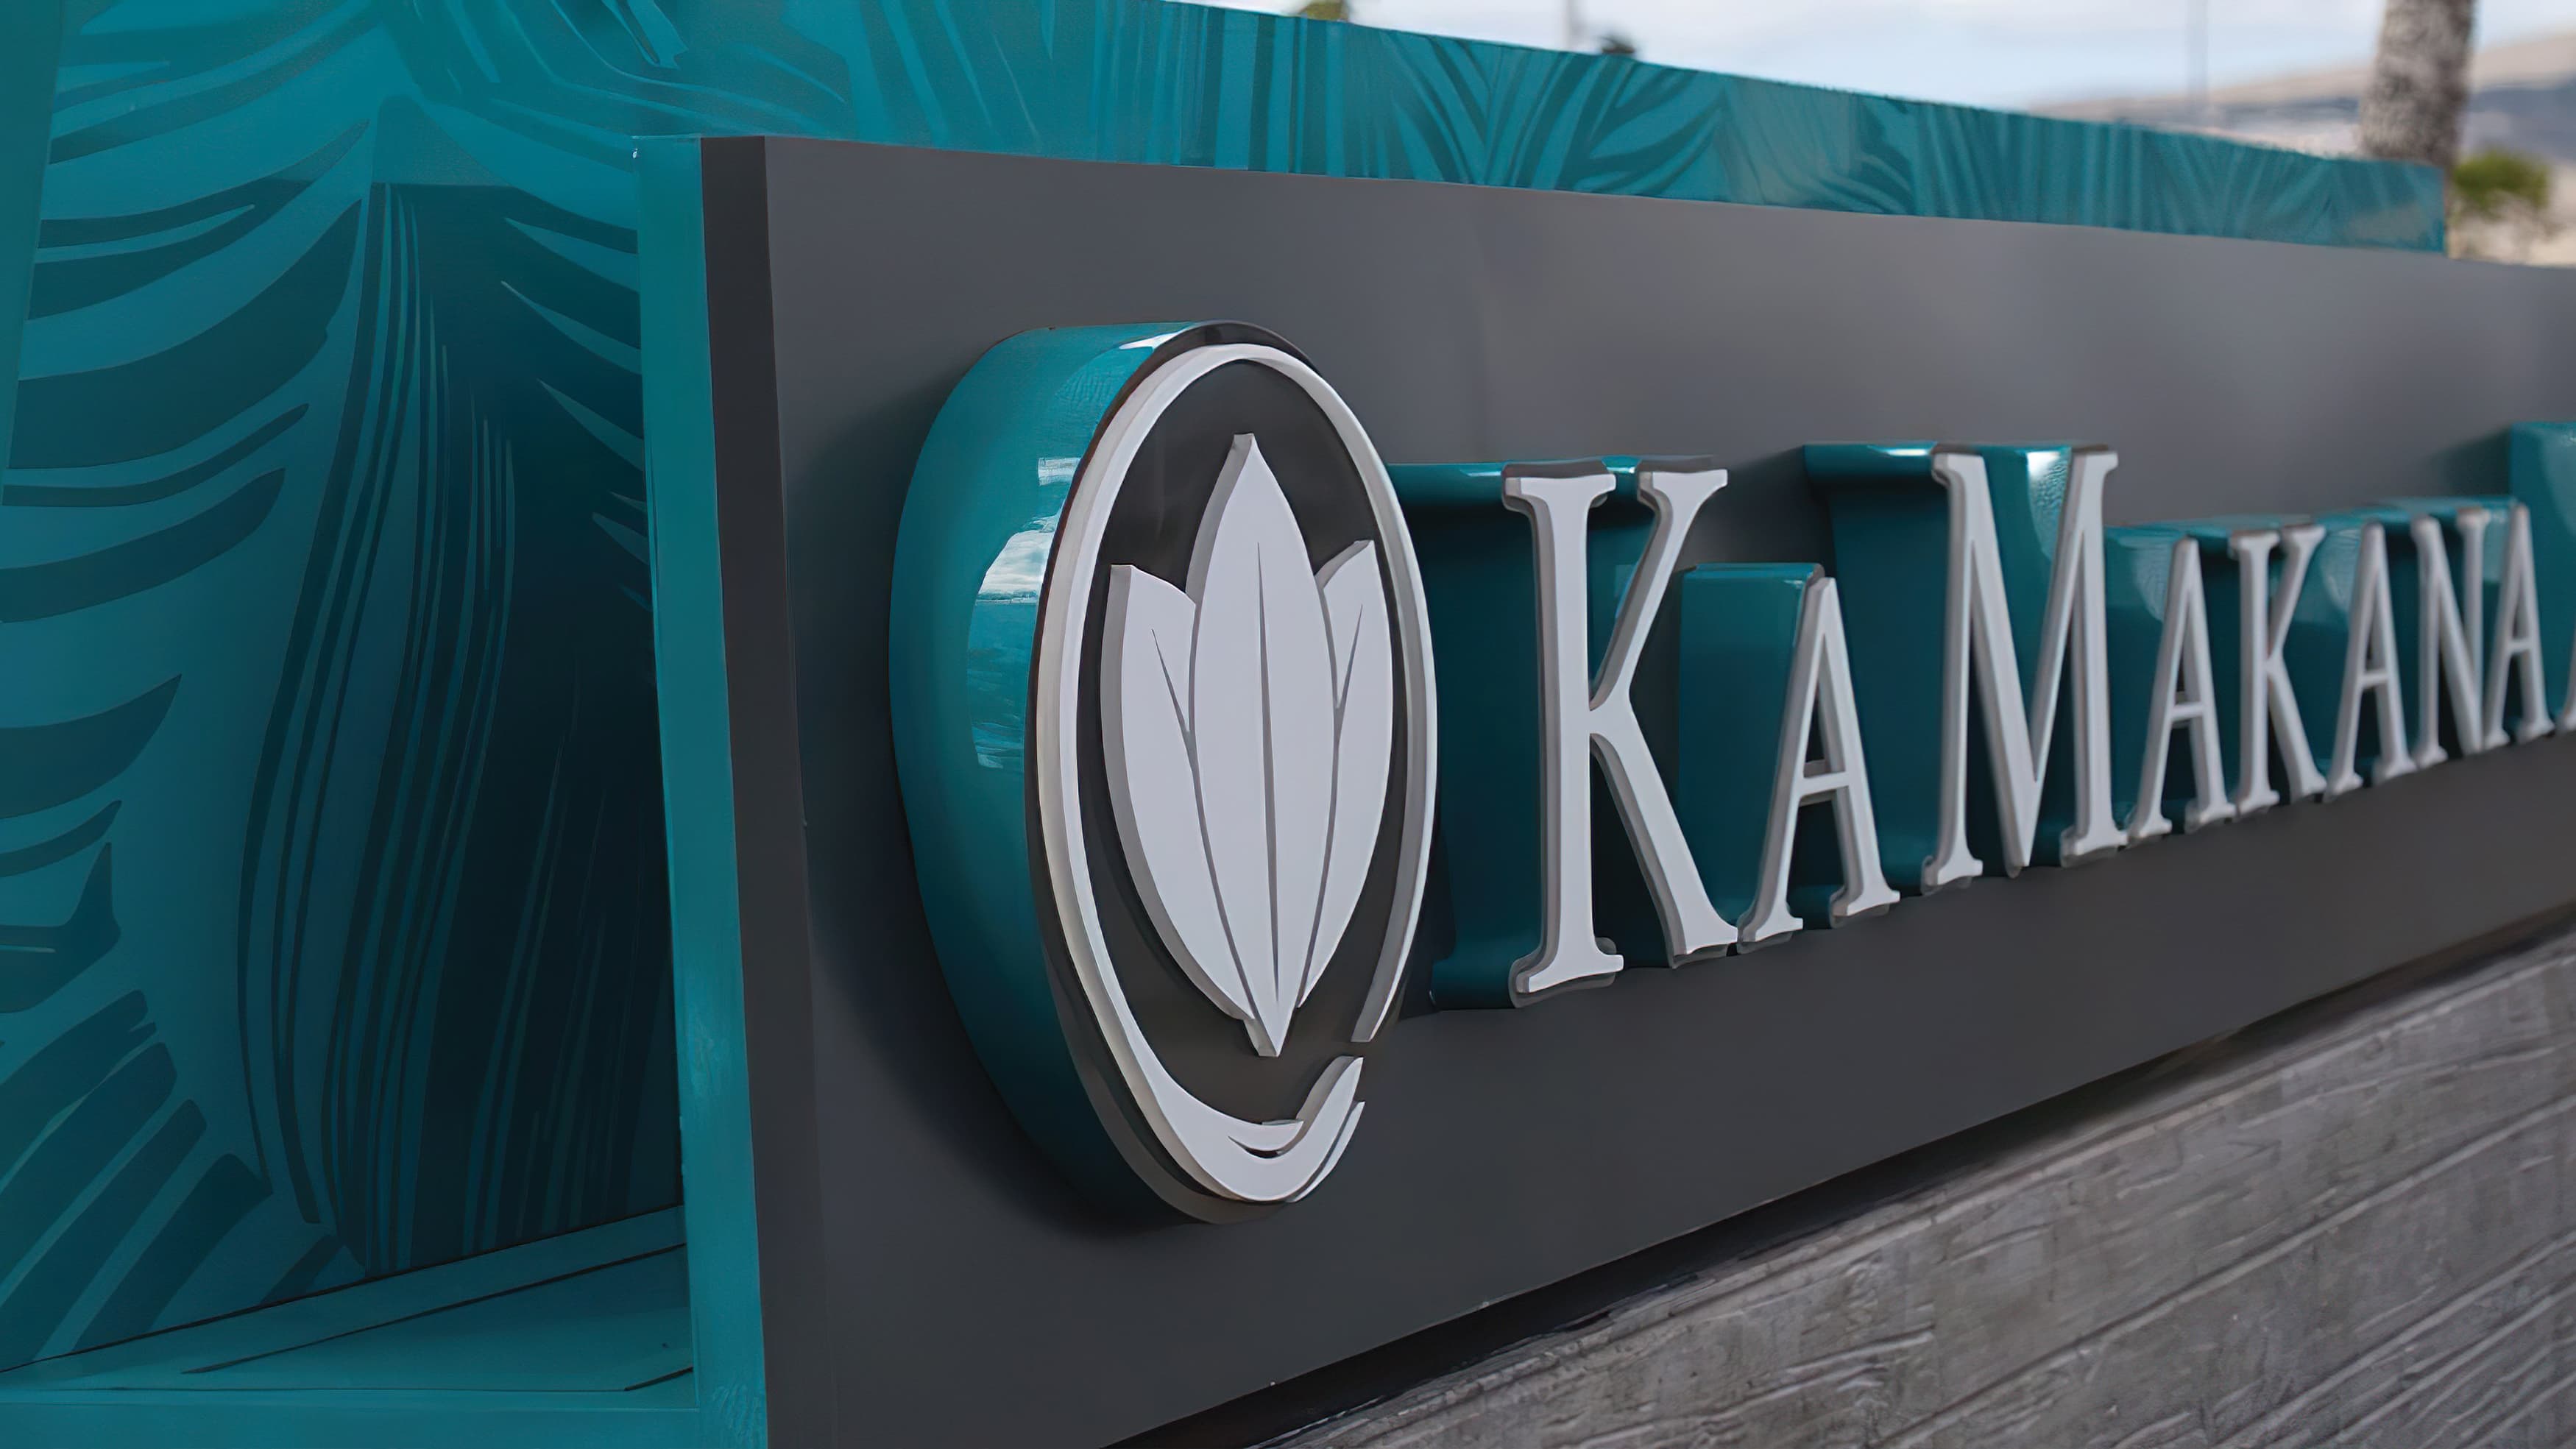 Monument signage at Ka Makana in Hawaii with tone on tone pattern and colored letter returns